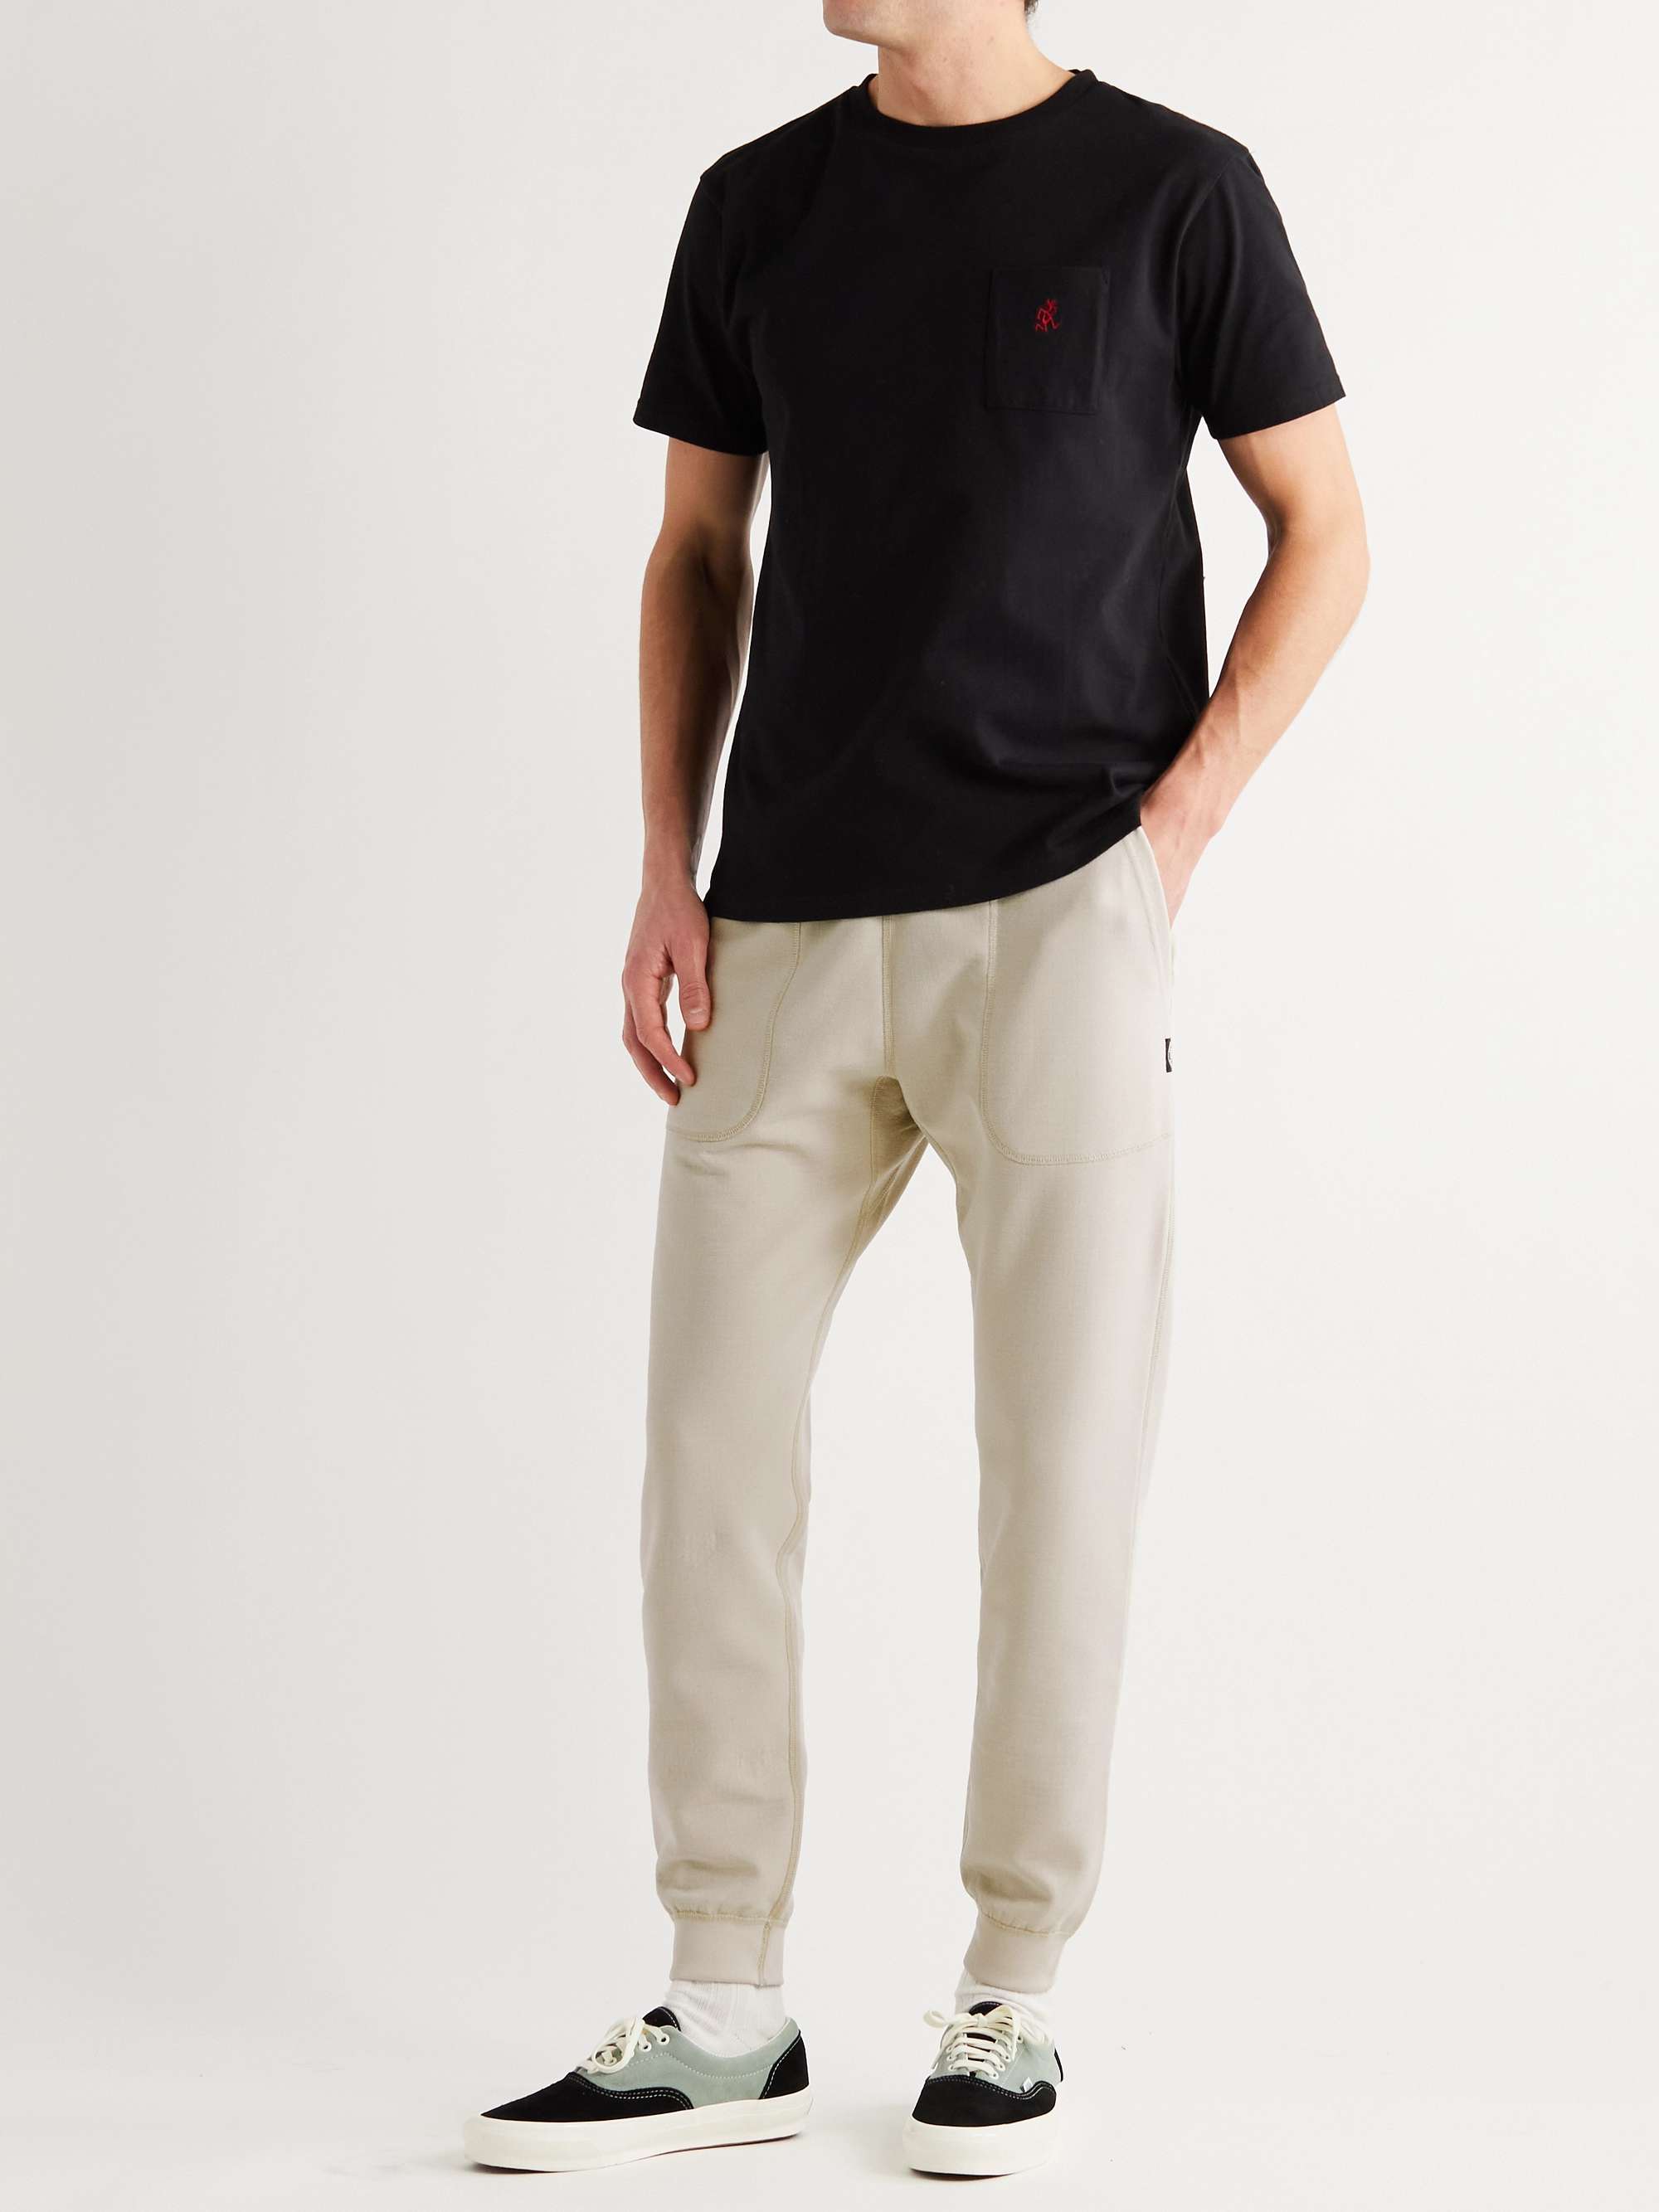 REIGNING CHAMP Slim-Fit Tapered Polartec Power Air Sweatpants